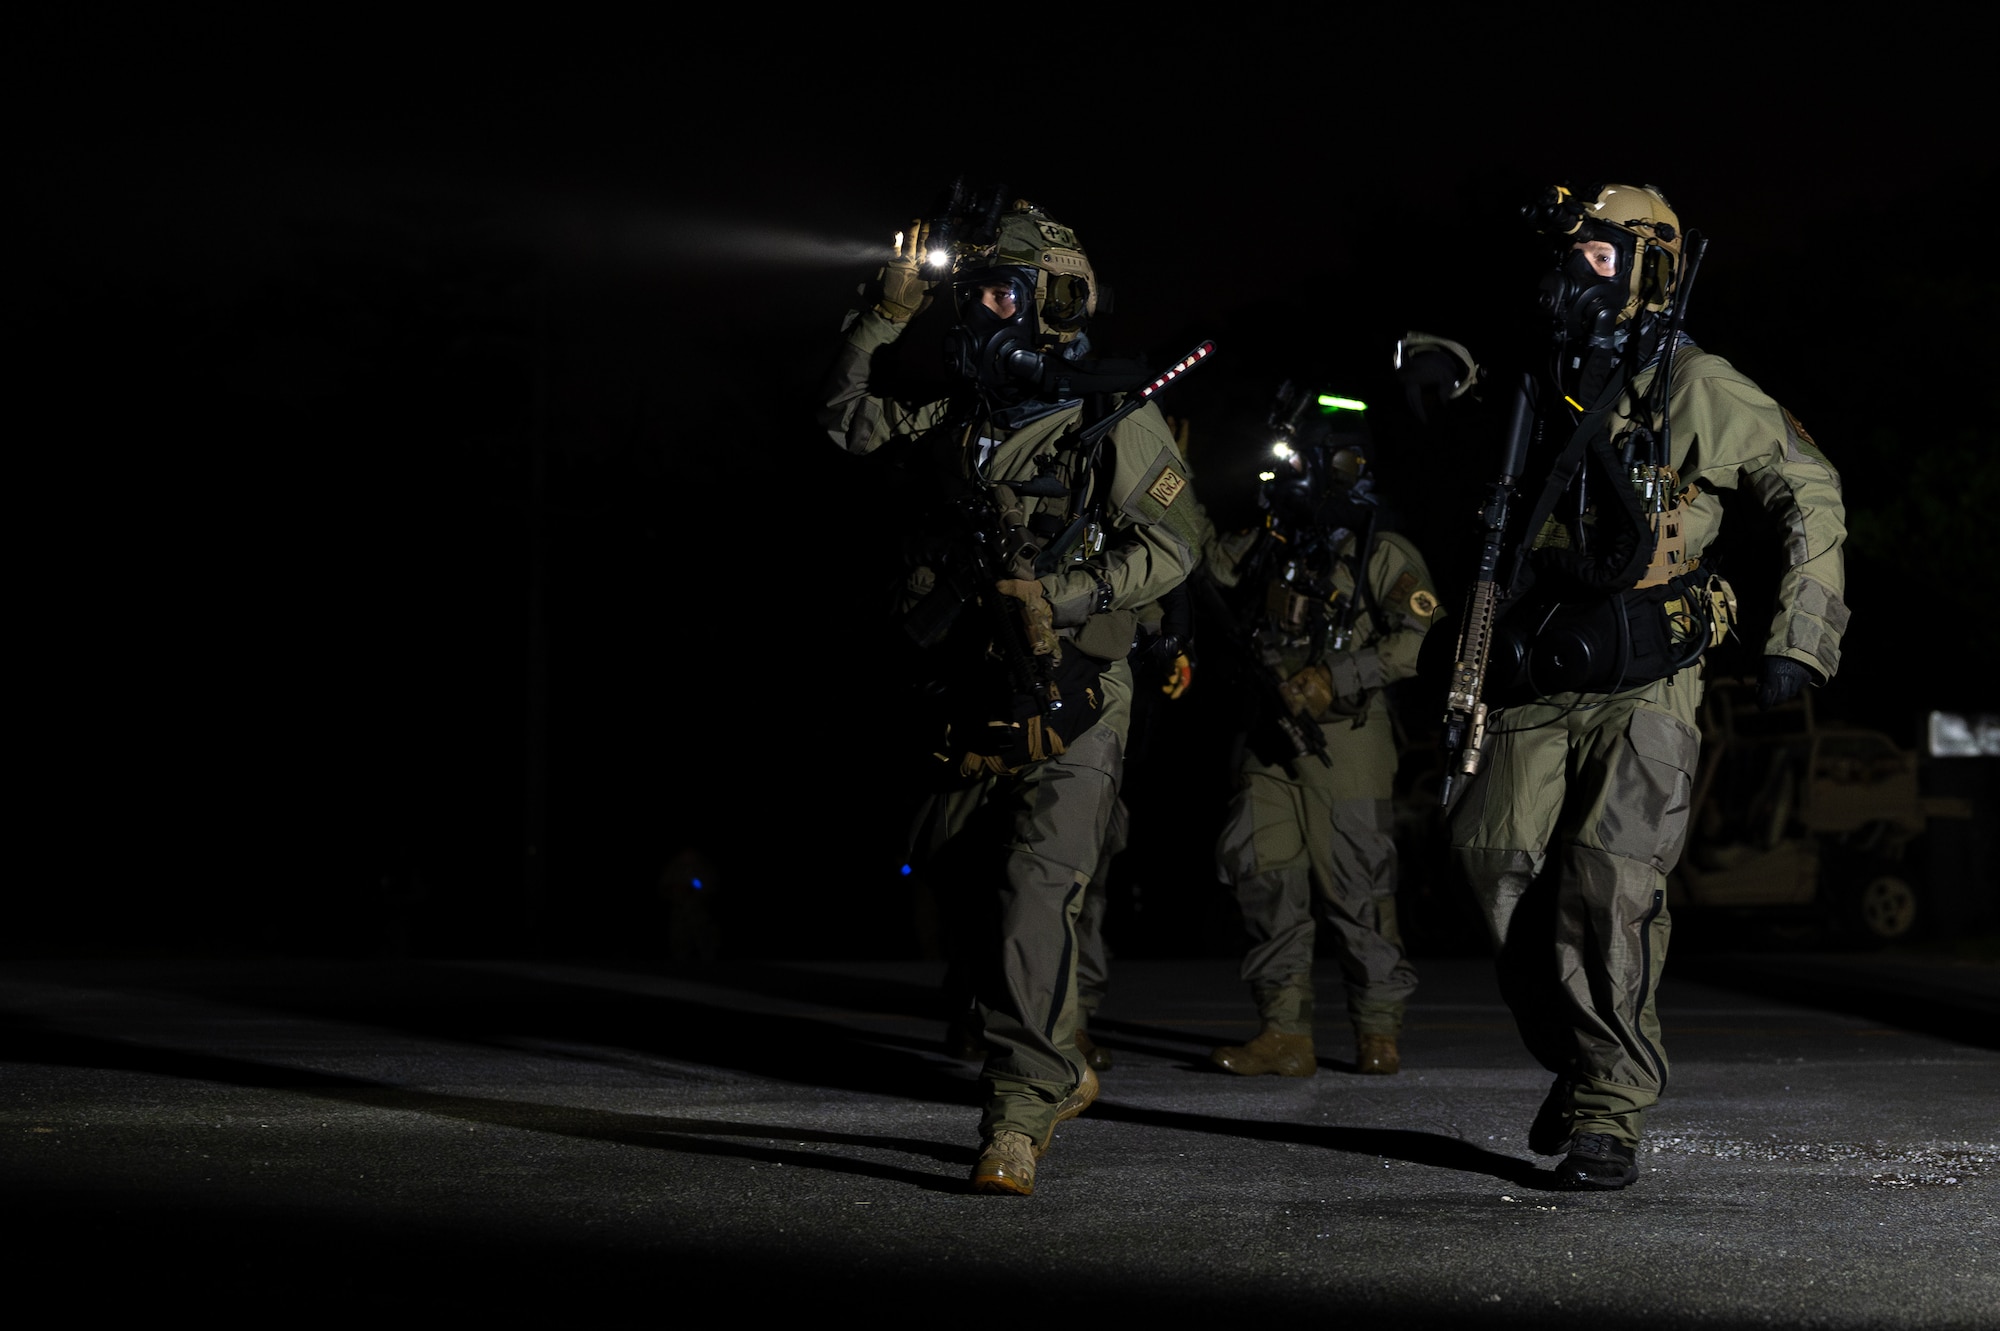 U.S. Air Force Airmen with the 353rd Special Operations Wing prepare to enter an accident scene during a simulated chemical, biological, radiological, nuclear, and explosives mass casualty drill at Kadena Air Base, Japan, Aug. 17, 2023. The operators were evaluated on their rapid action, decision making, and technical performance of medical interventions during a CBRNE scenario-based training. (U.S. Air Force photo by Staff Sgt. Jessi Roth)